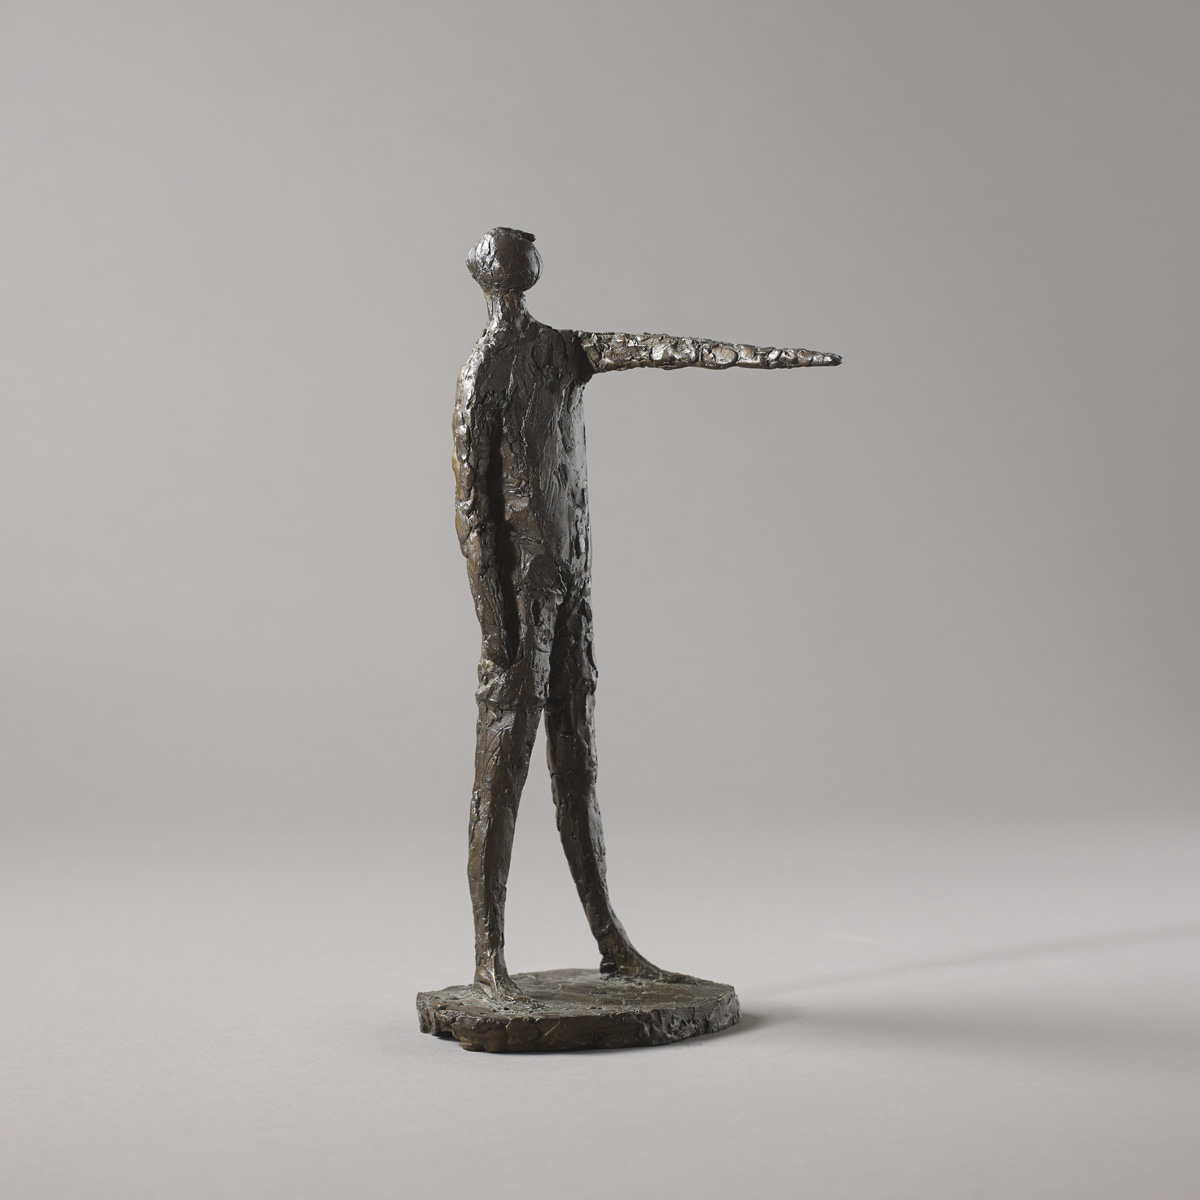 BOY STANDING by Melanie le Brocquy sold for 1,800 at Whyte's Auctions